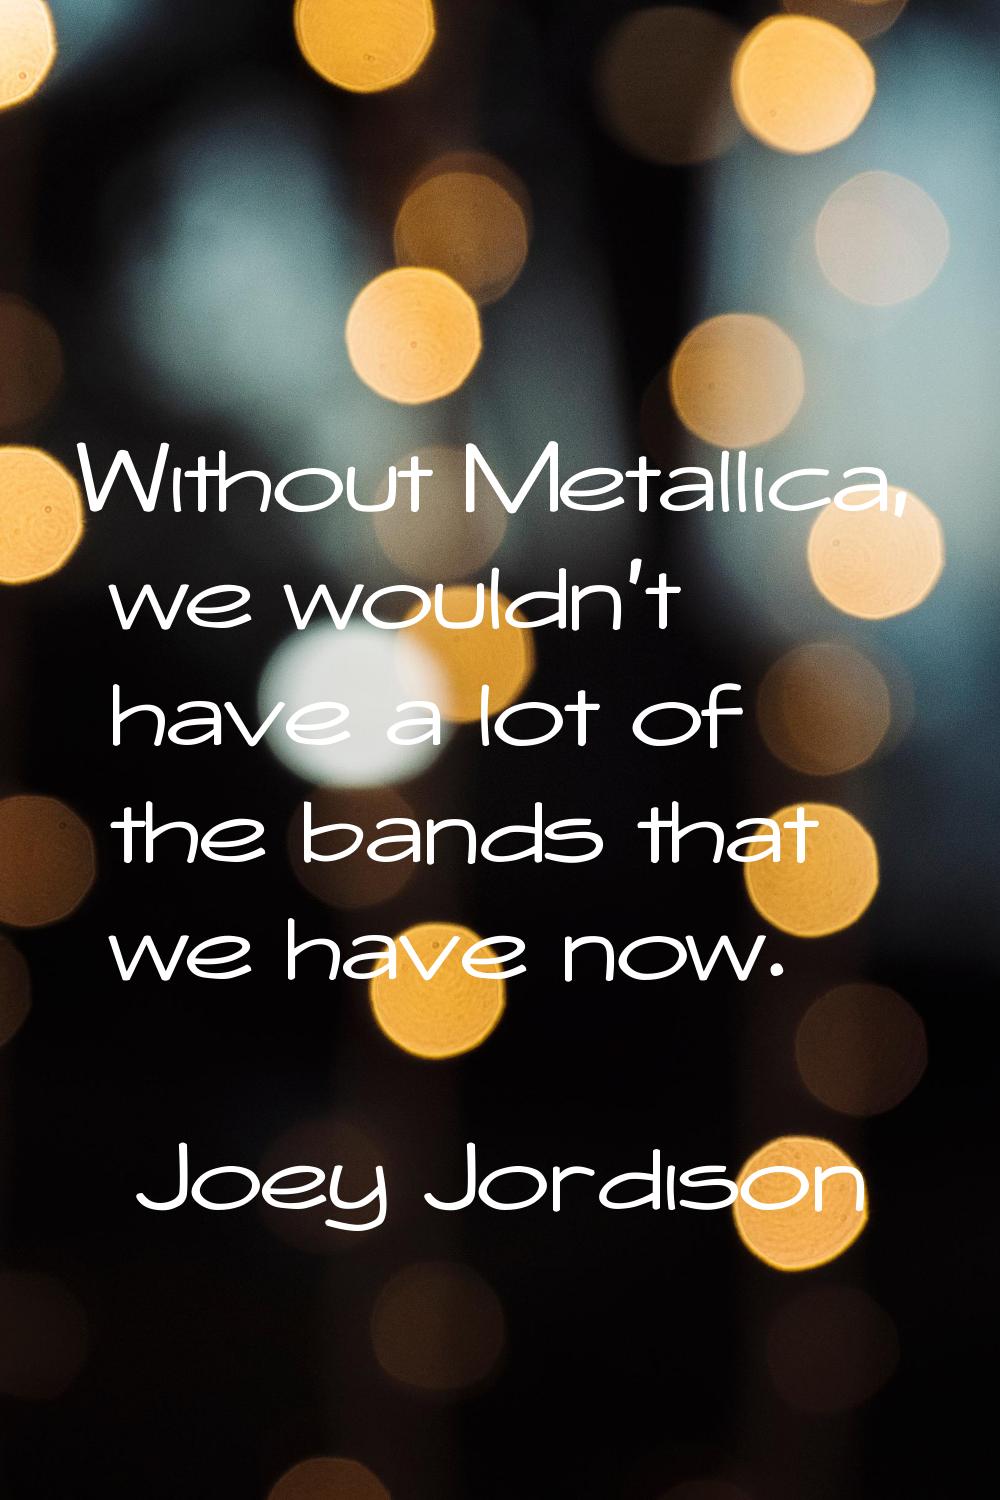 Without Metallica, we wouldn't have a lot of the bands that we have now.